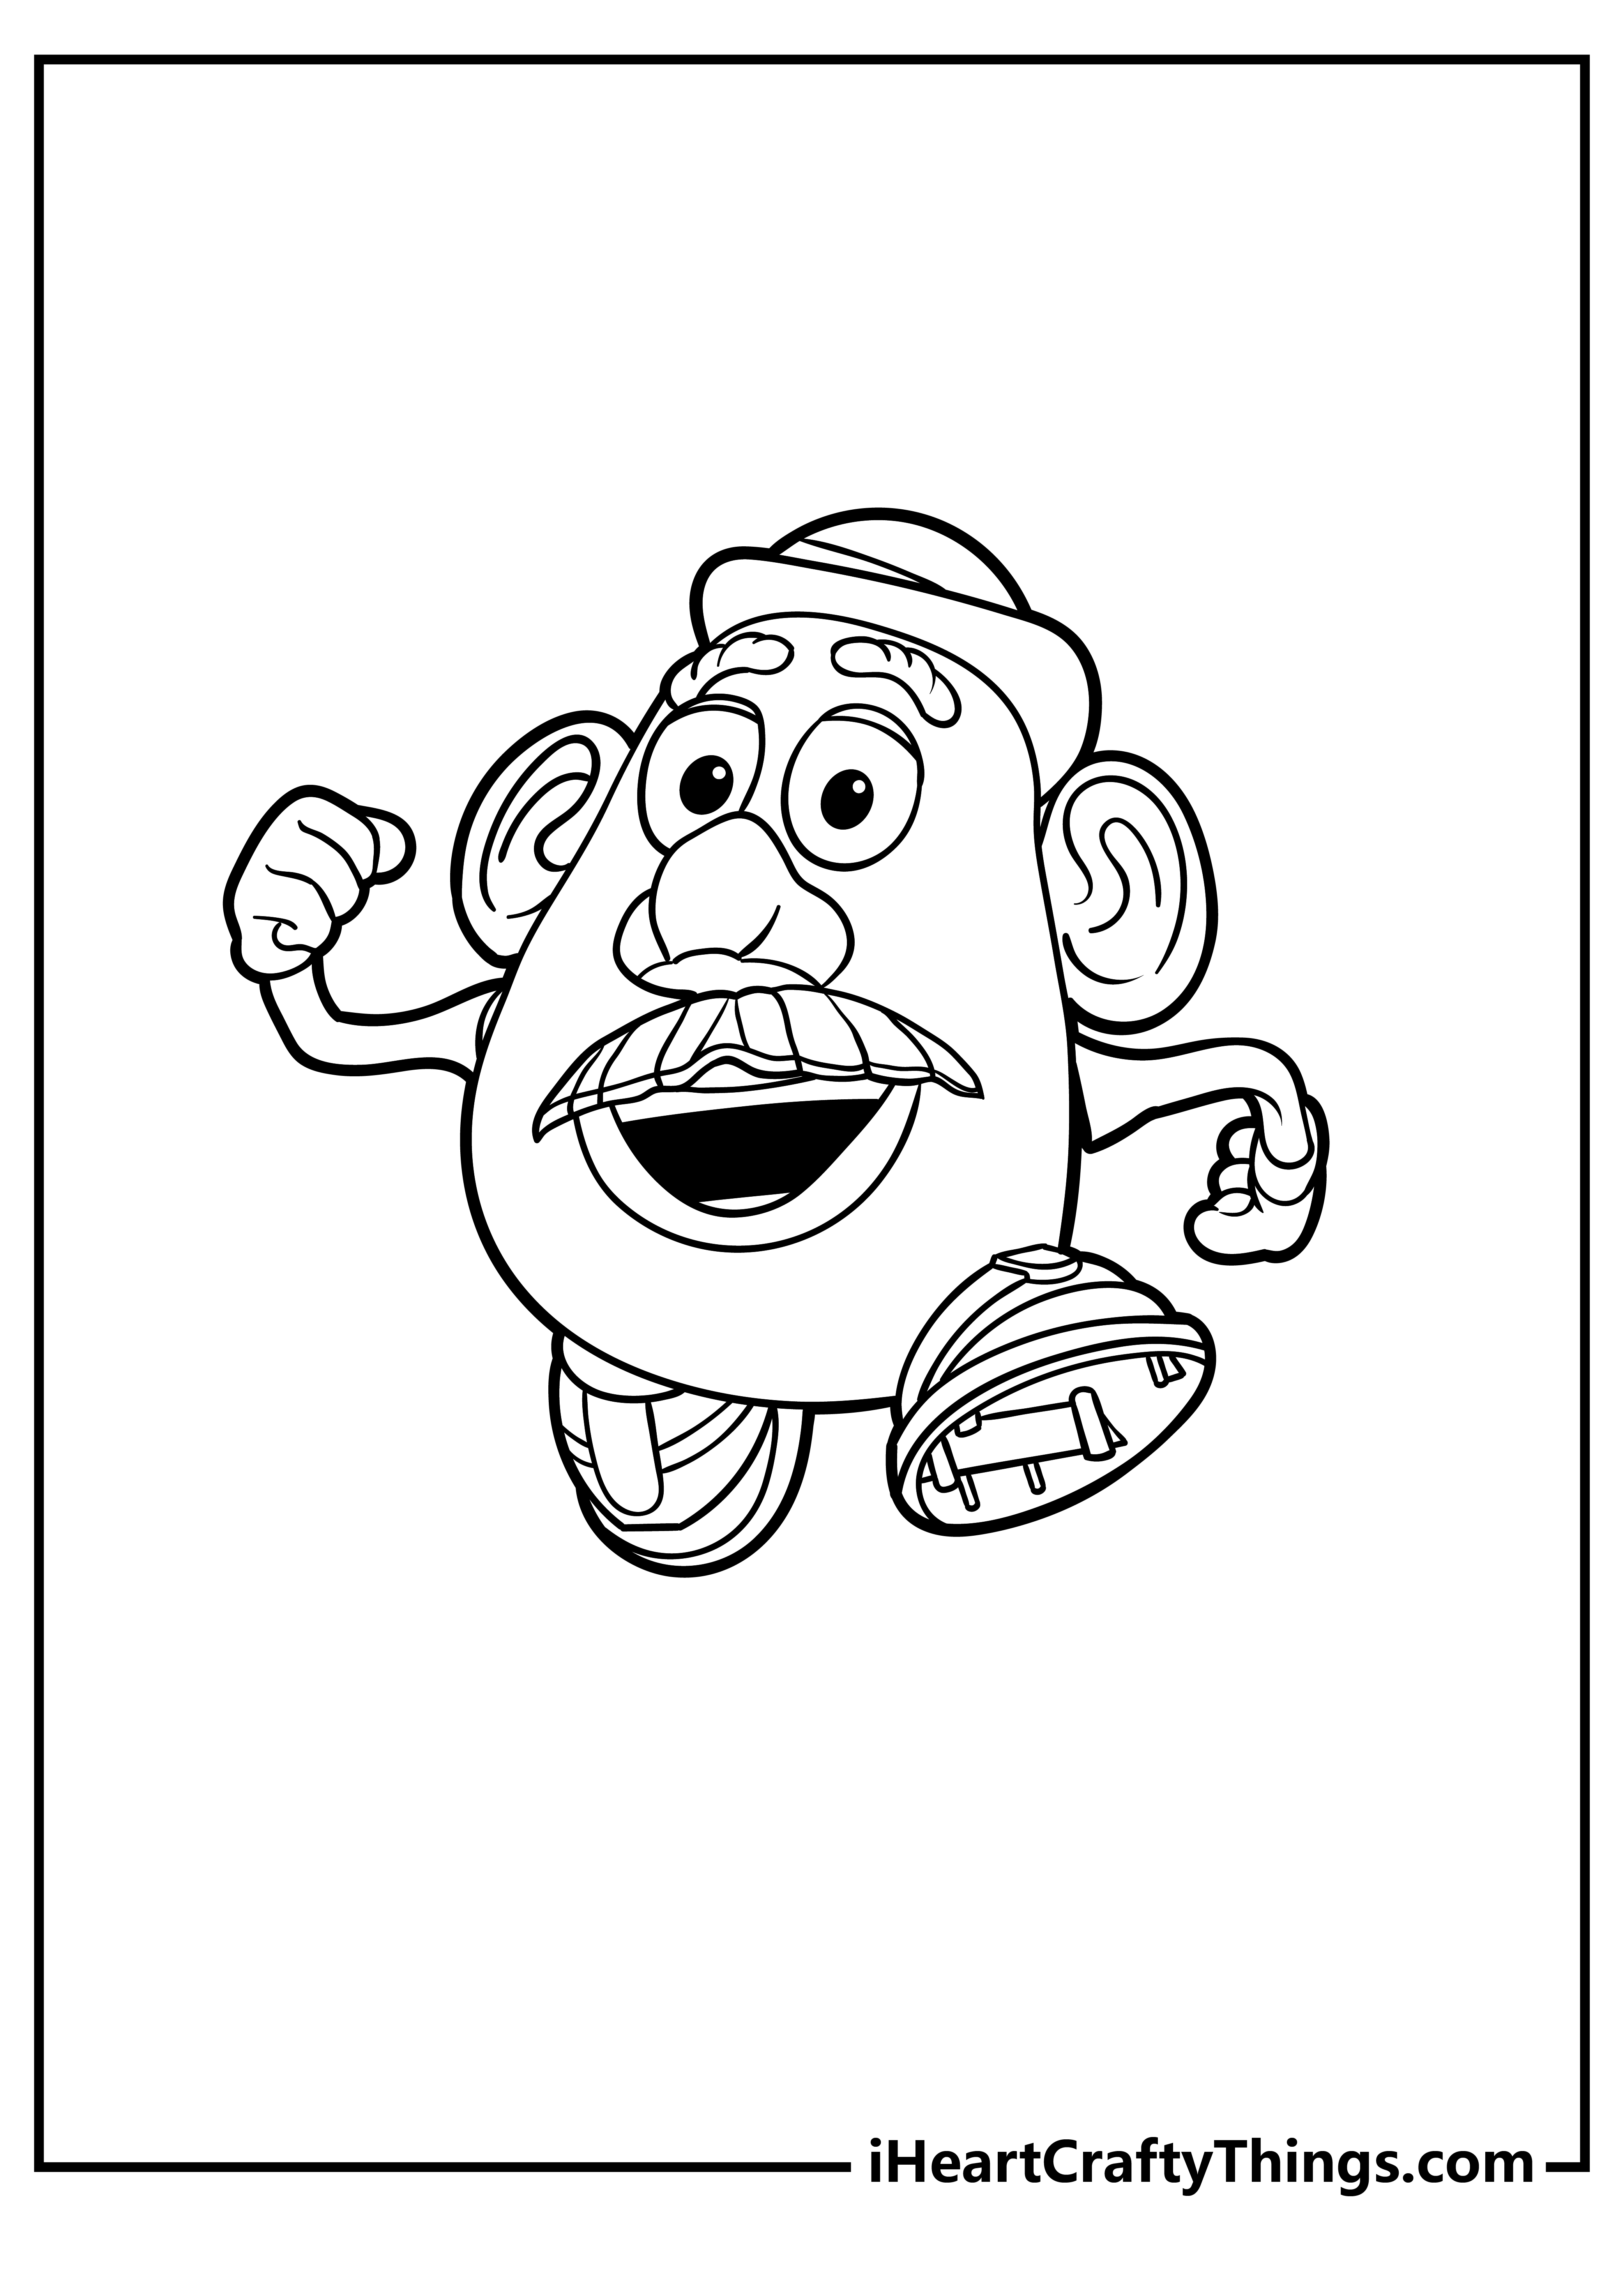 Great Activity Book to Color All Your Favorite Toy Story Characters Toy Story Coloring Book for Kids